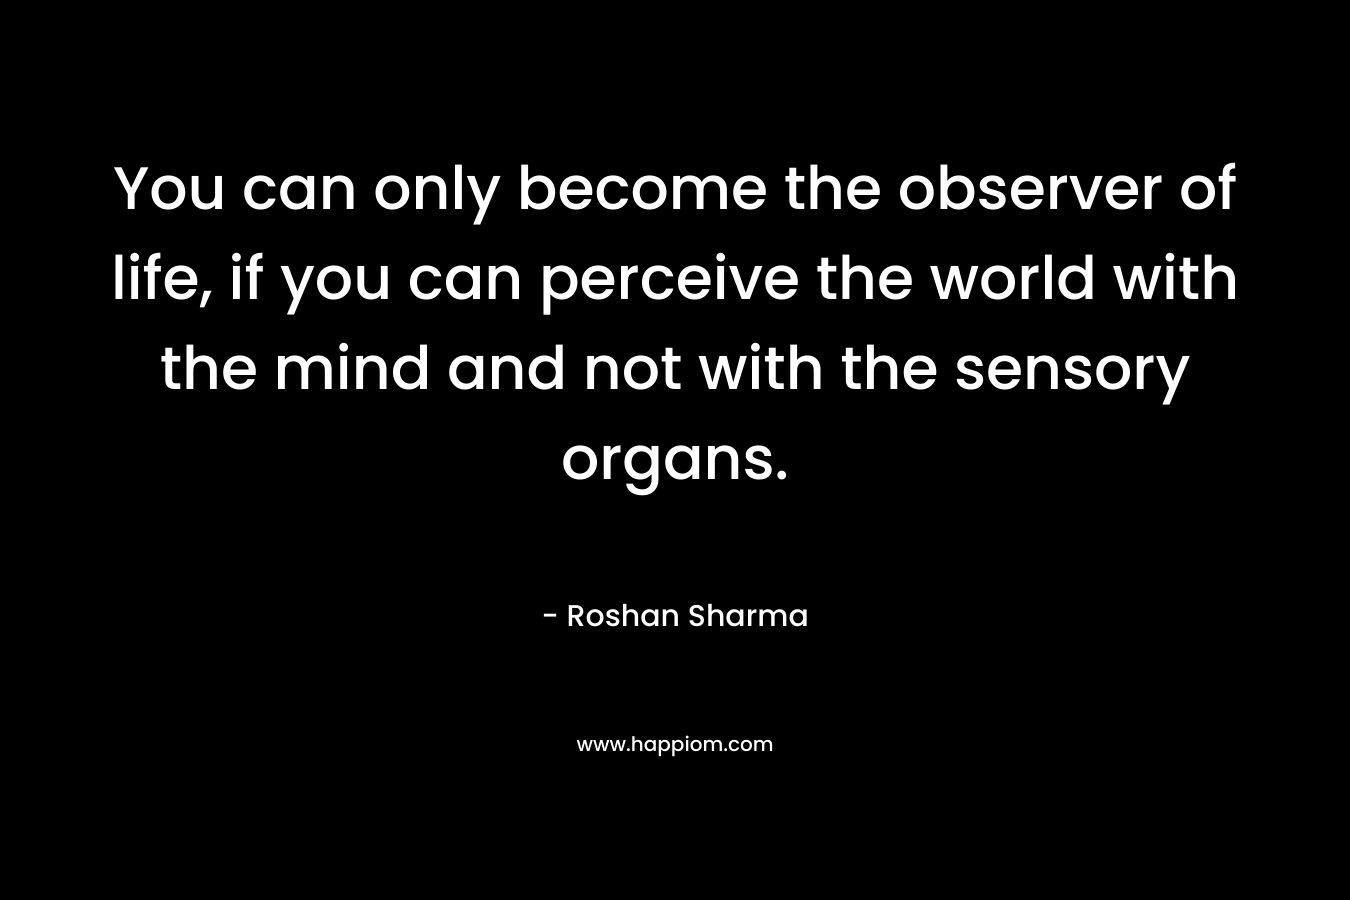 You can only become the observer of life, if you can perceive the world with the mind and not with the sensory organs.